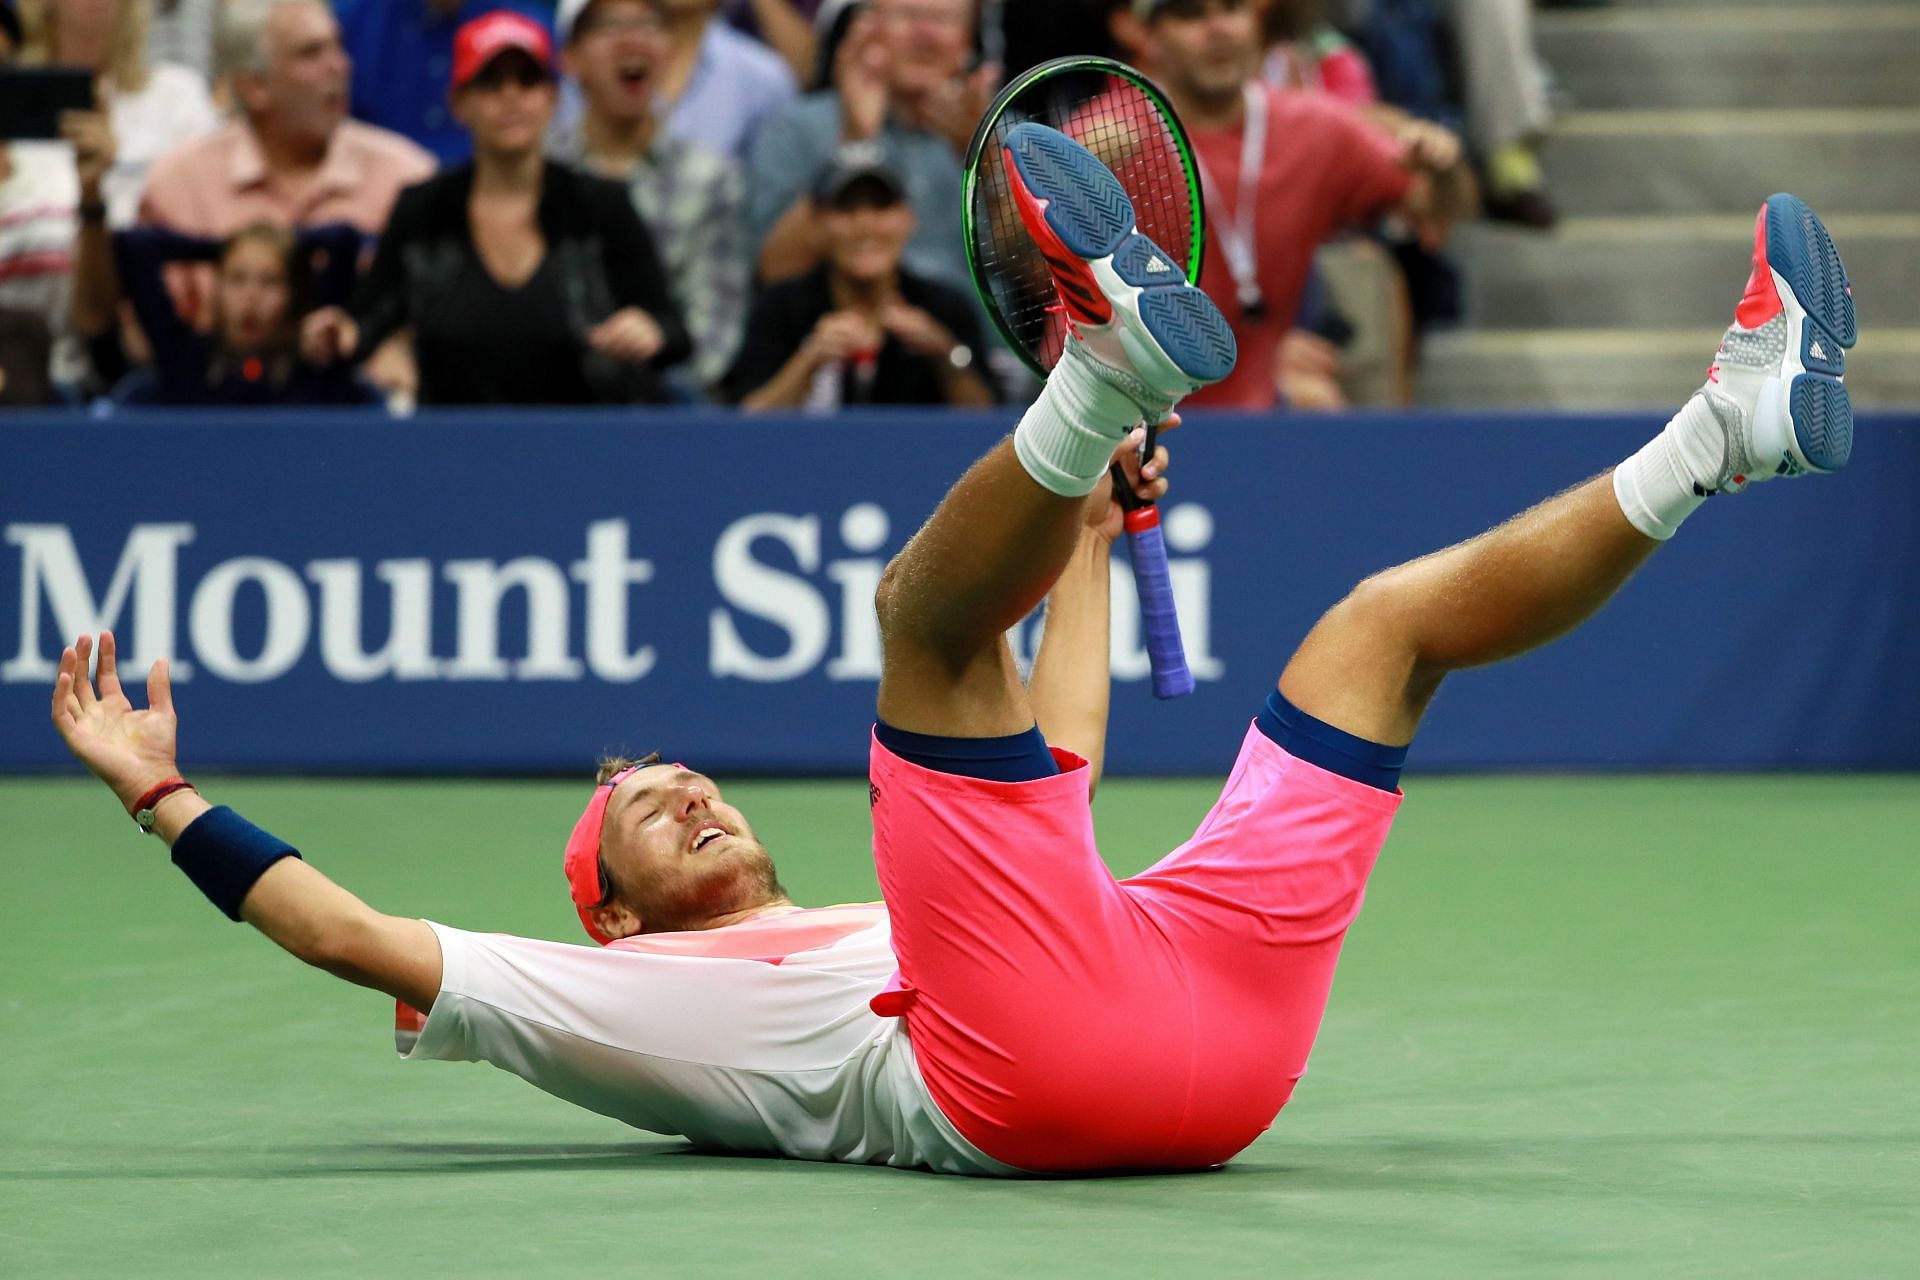 Luca Pouille defeated Rafael Nadal at the 2016 US Open